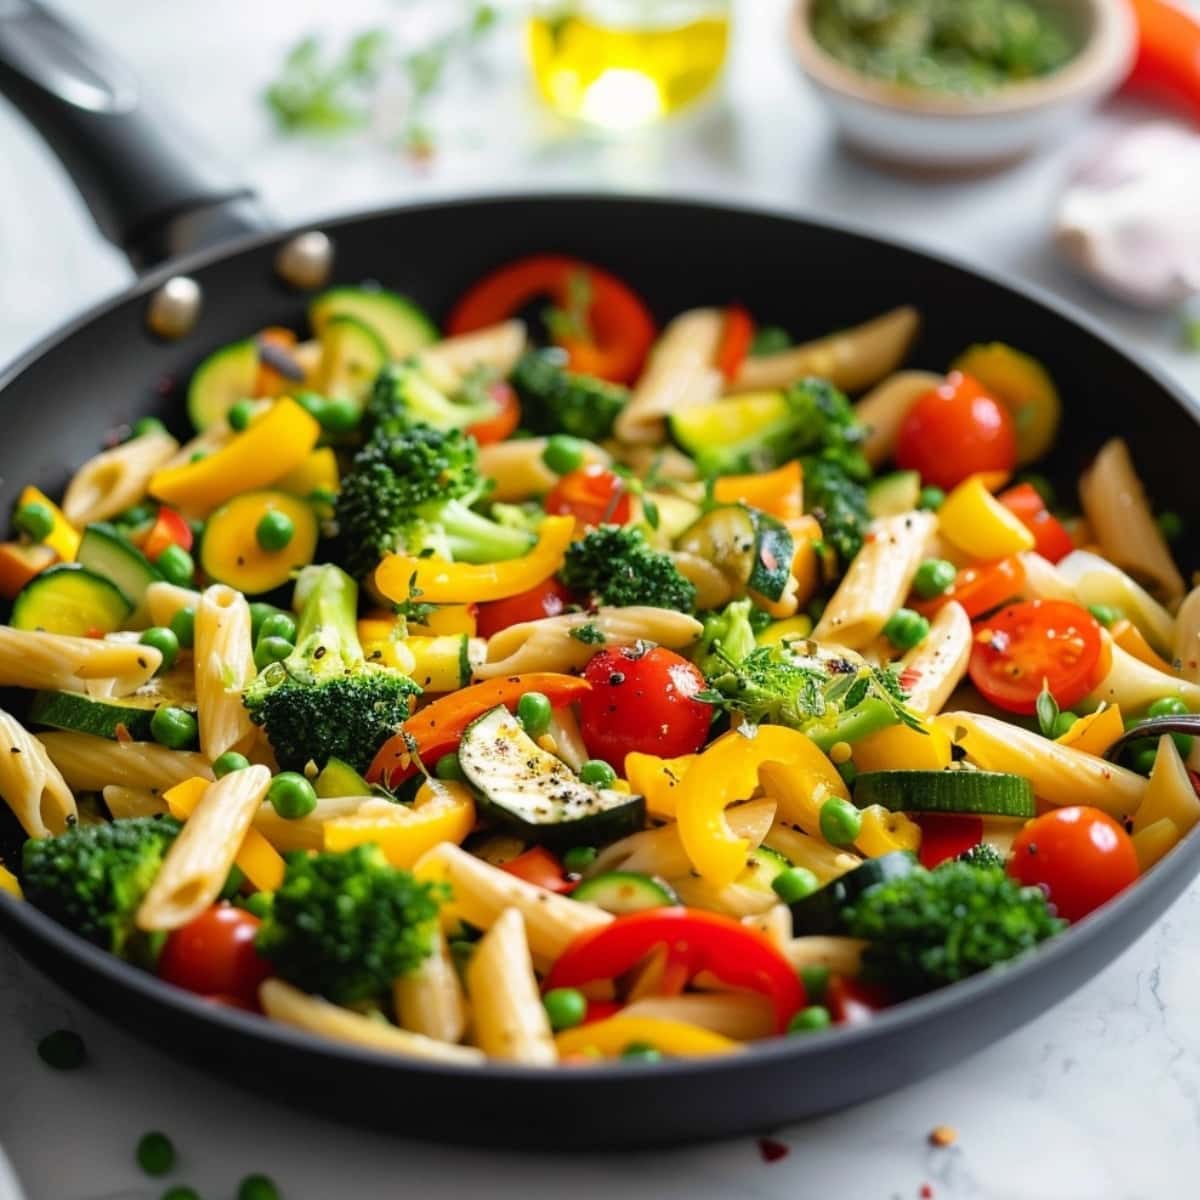 Pasta Primavera made in Penne pasta, Red bell pepper, Zucchini, Yellow squash, Broccoli florets, Cherry tomatoes, Frozen peas tossed in pan.